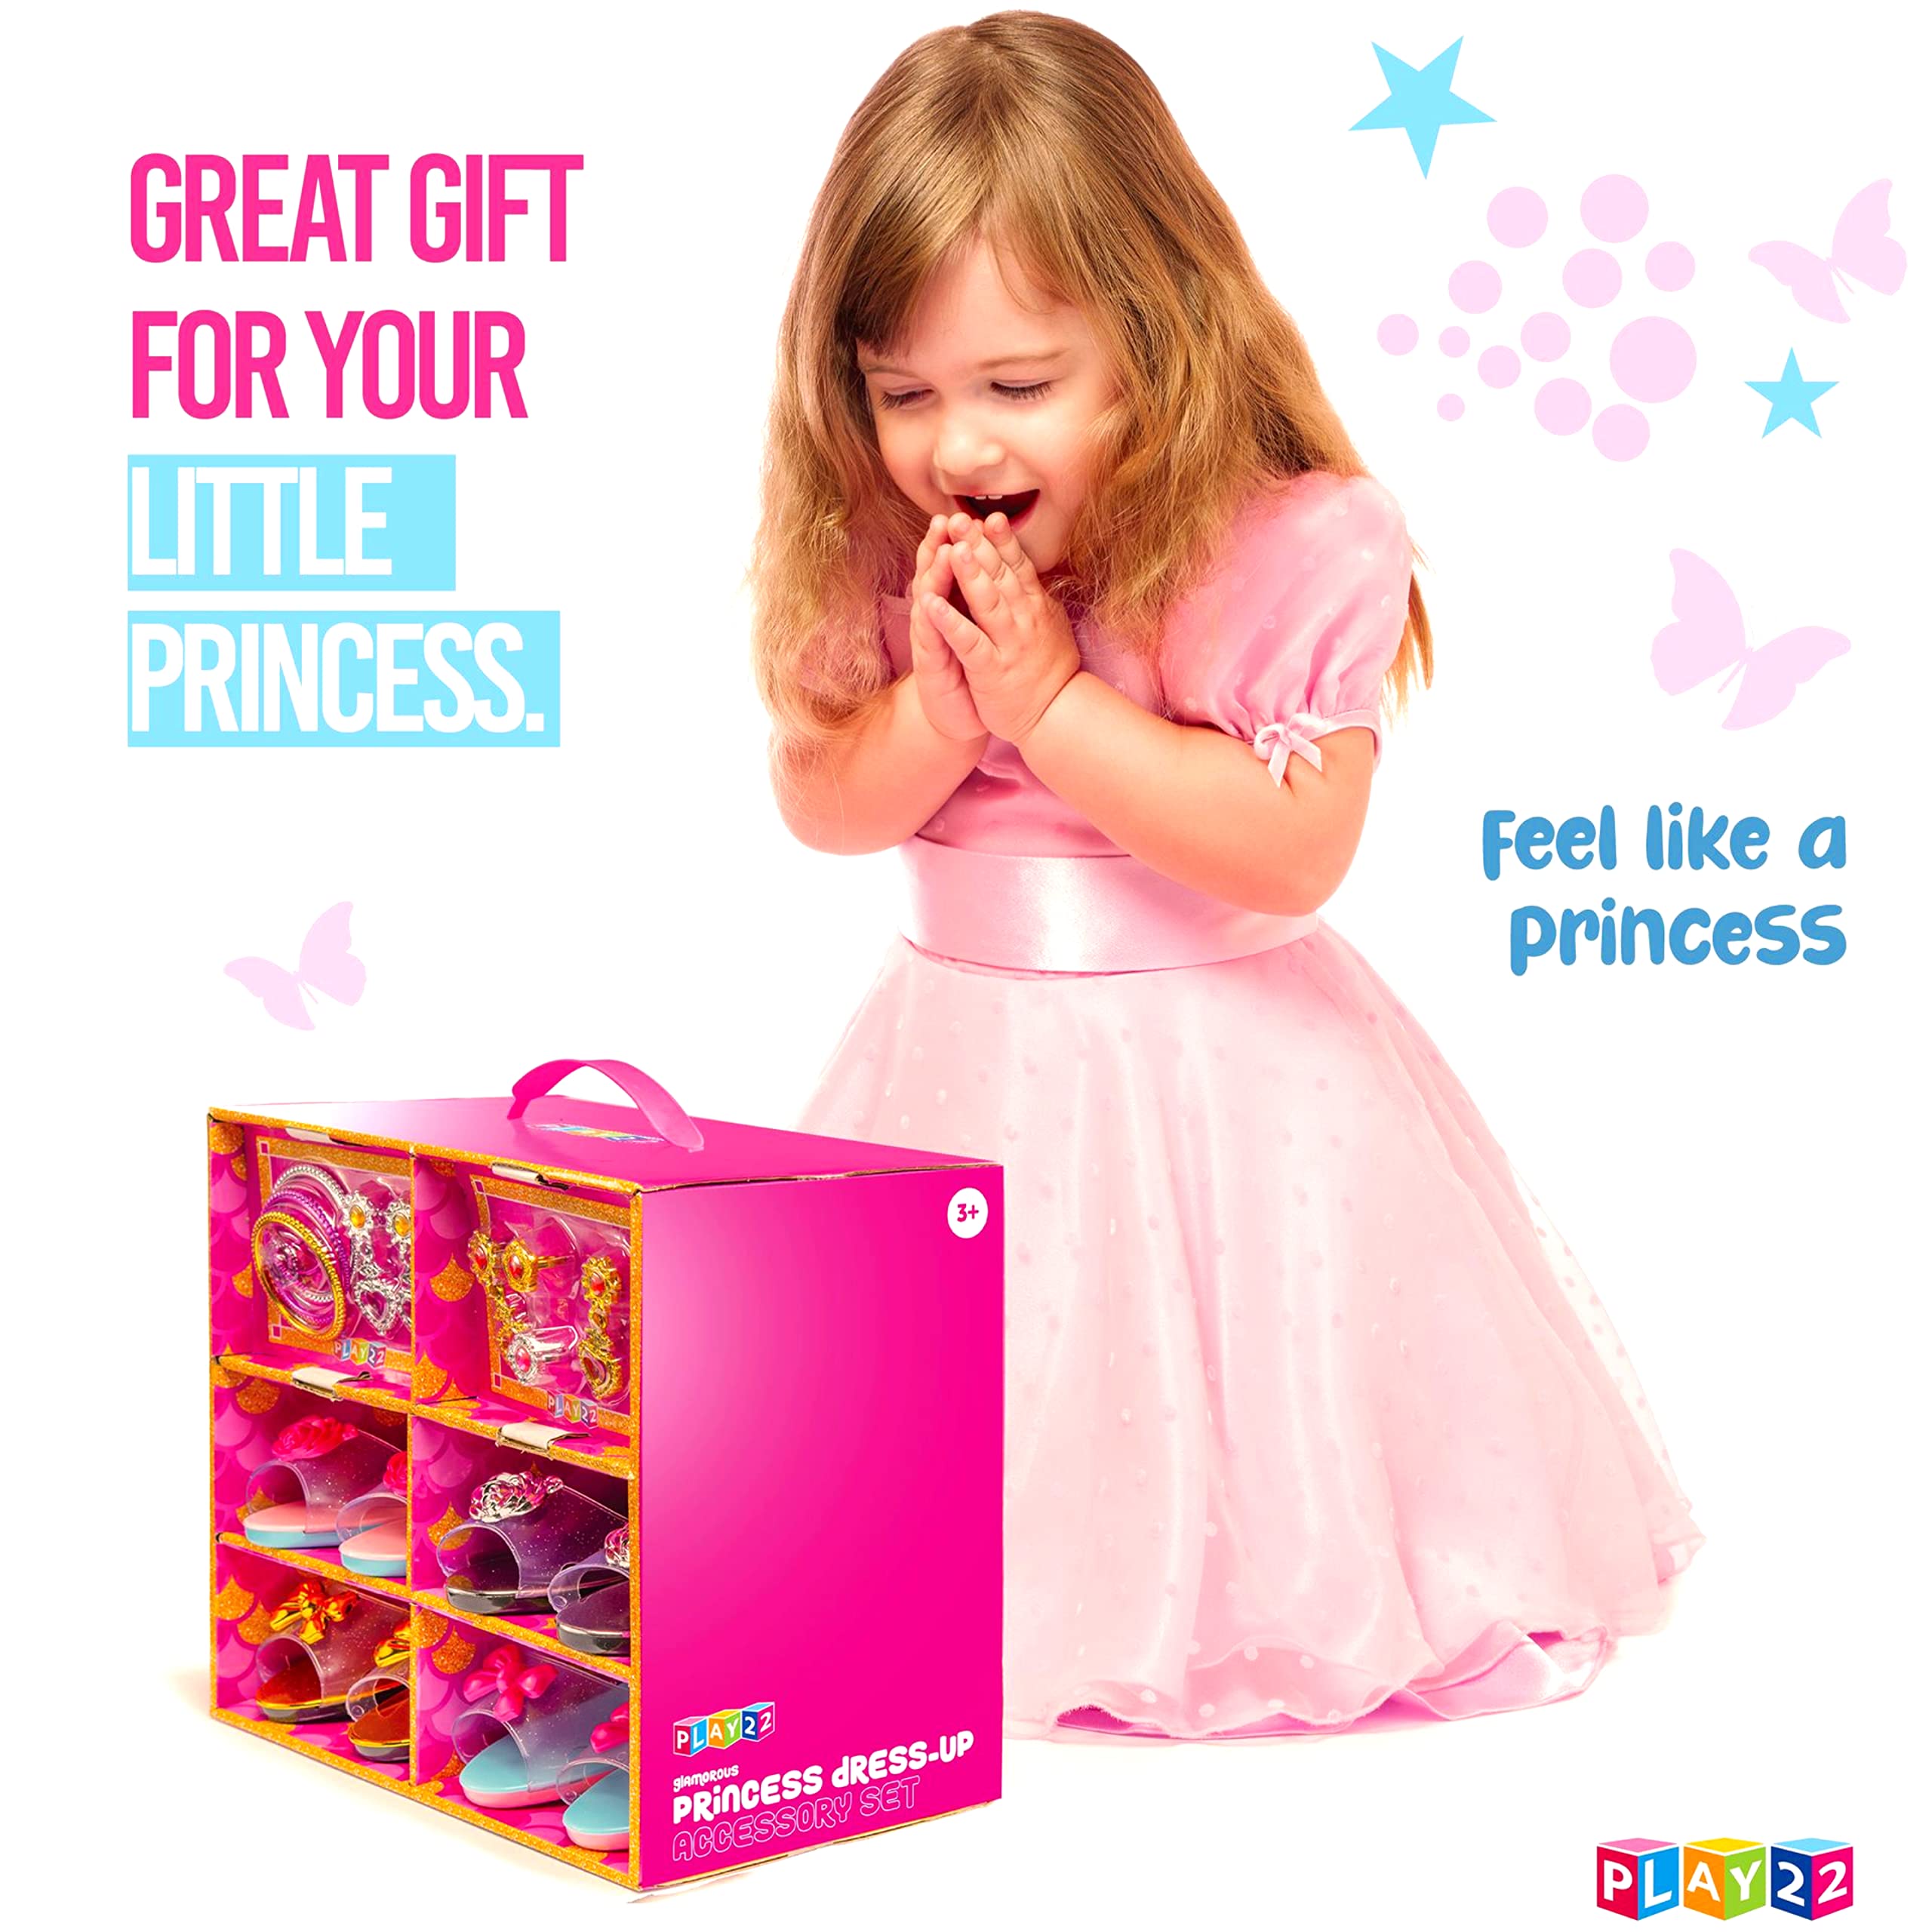 Play22 Princess Dress Up Shoes - 18pc Princess Toys for Little Girls - Toddler Dress Up Jewelry Toy Heels - 4 5 Year Old Girl Birthday Gifts – 4 Pairs of Shoes 2 Earrings 3 Bracelets and 3 Rings.